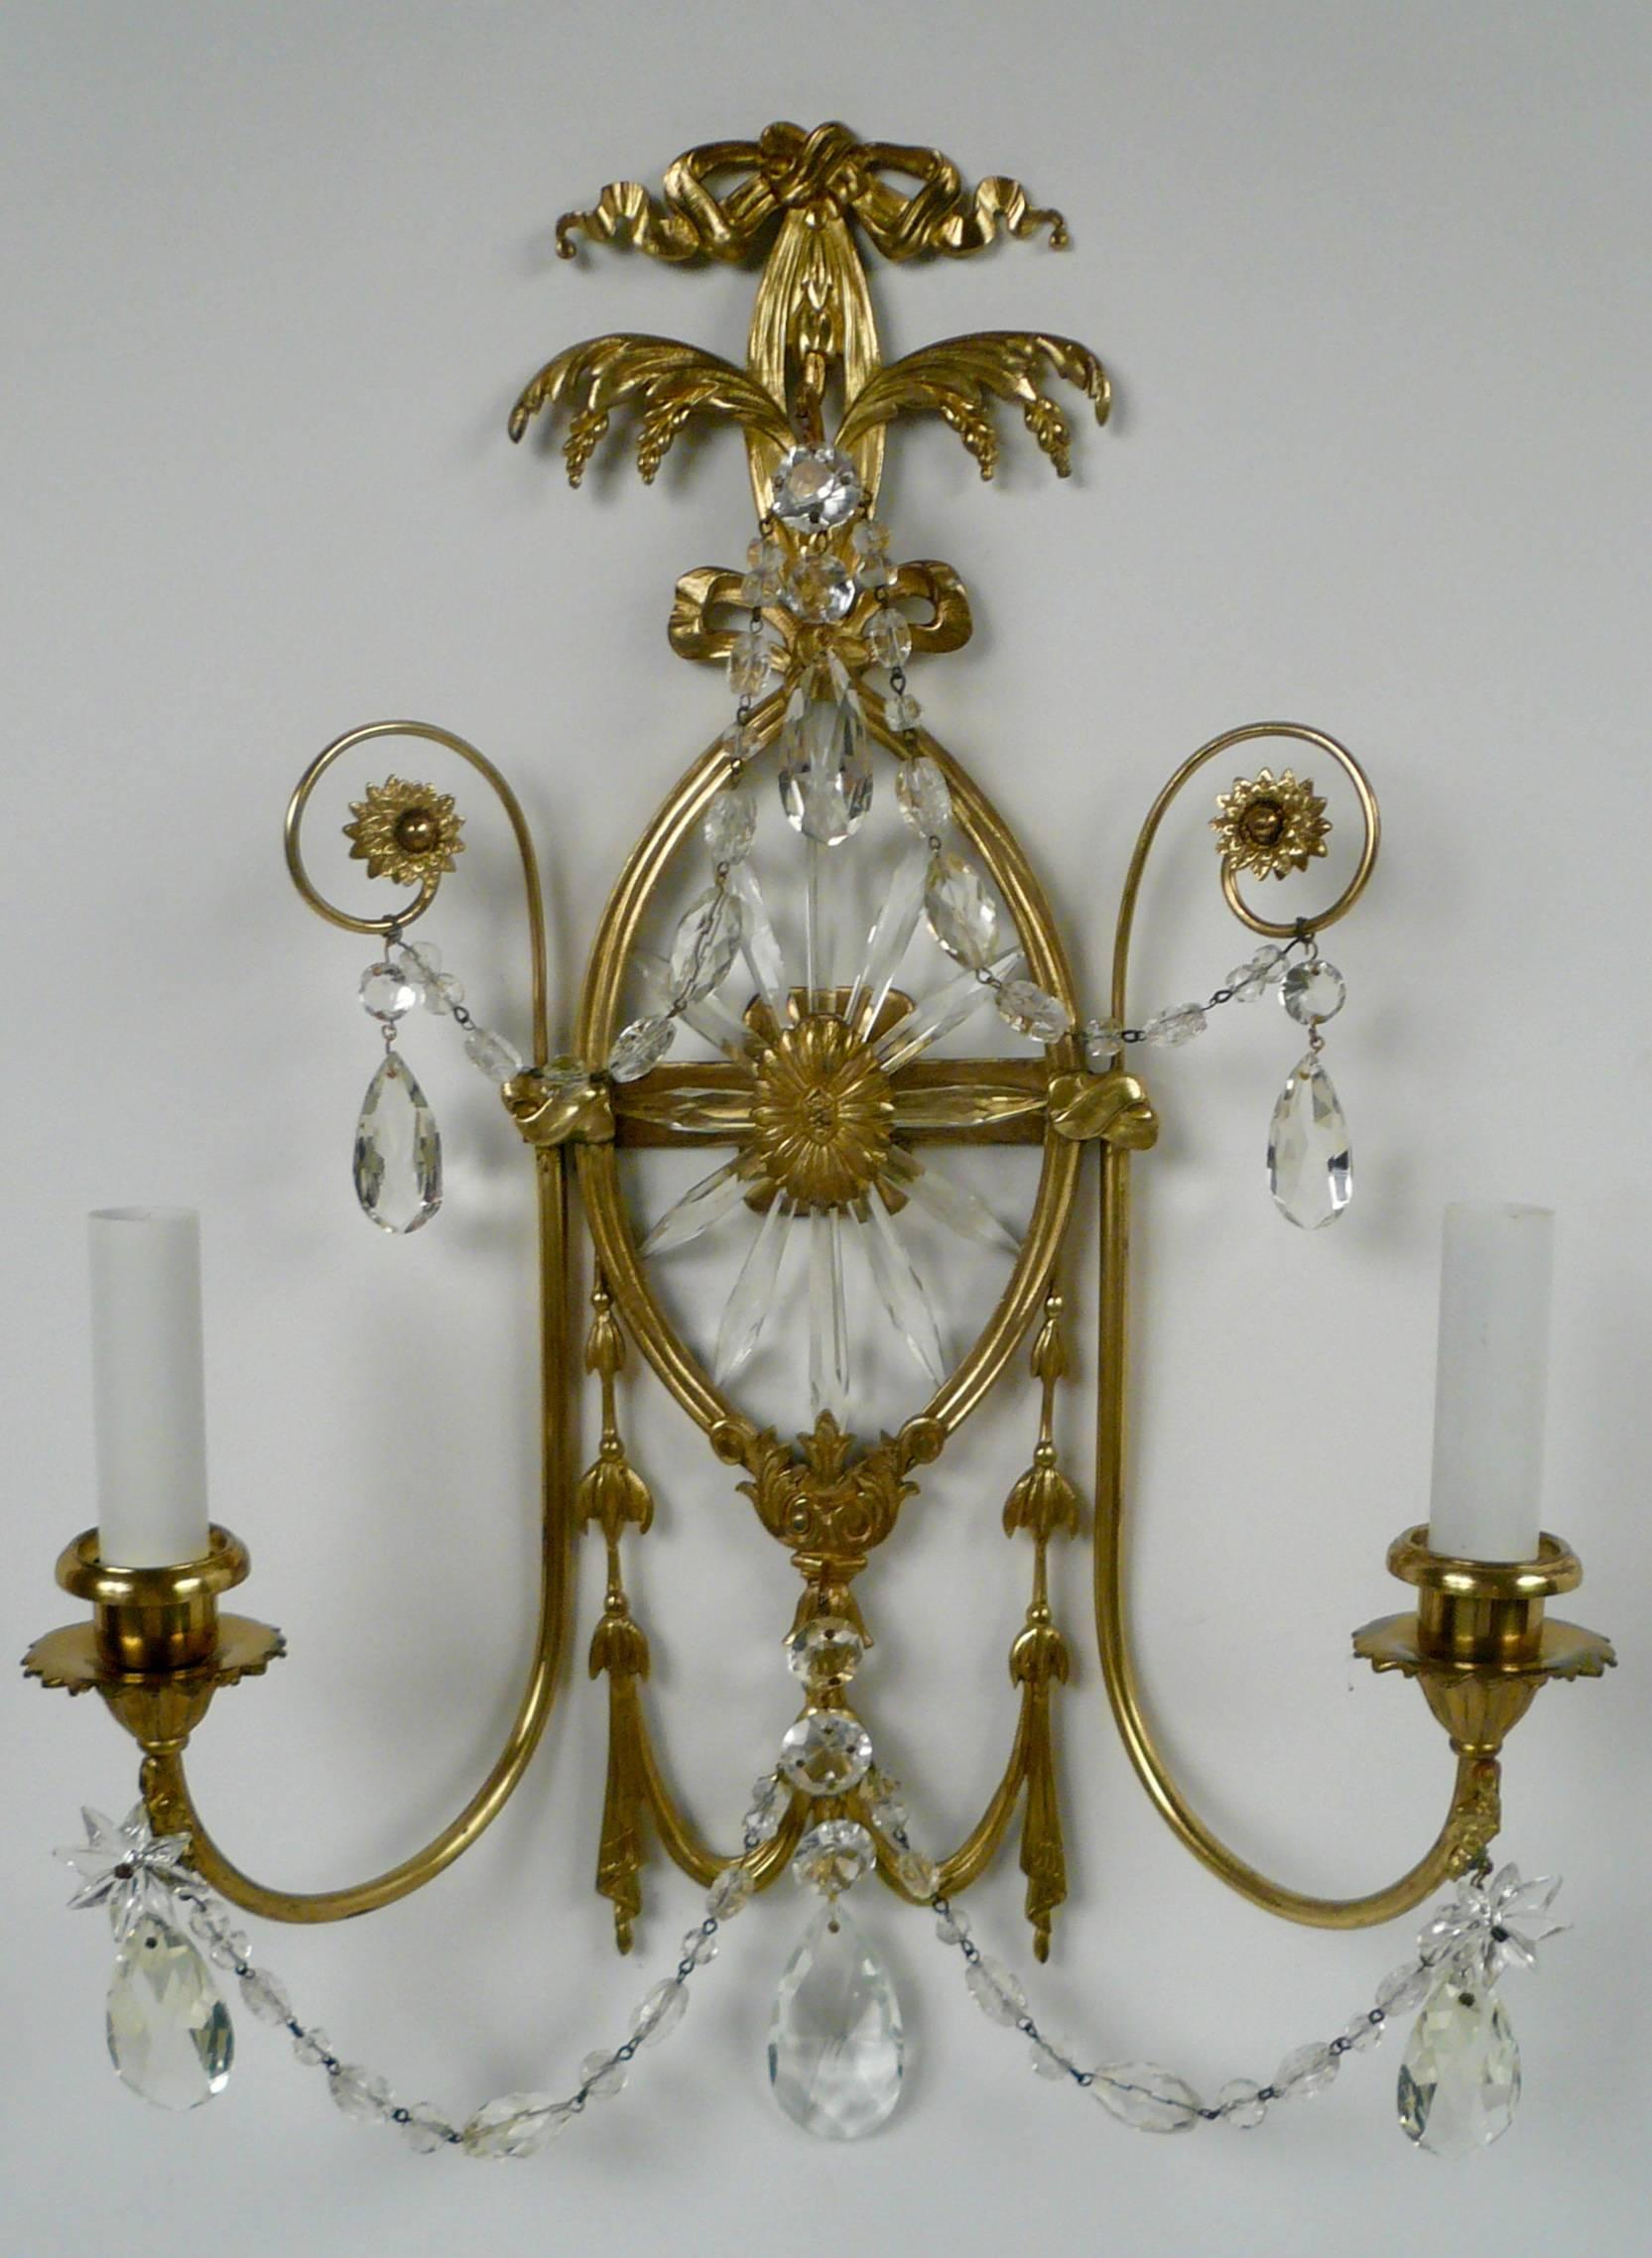 This pair of neoclassical style sconces with a Robert Adam design influence are well proportioned and in fine condition.